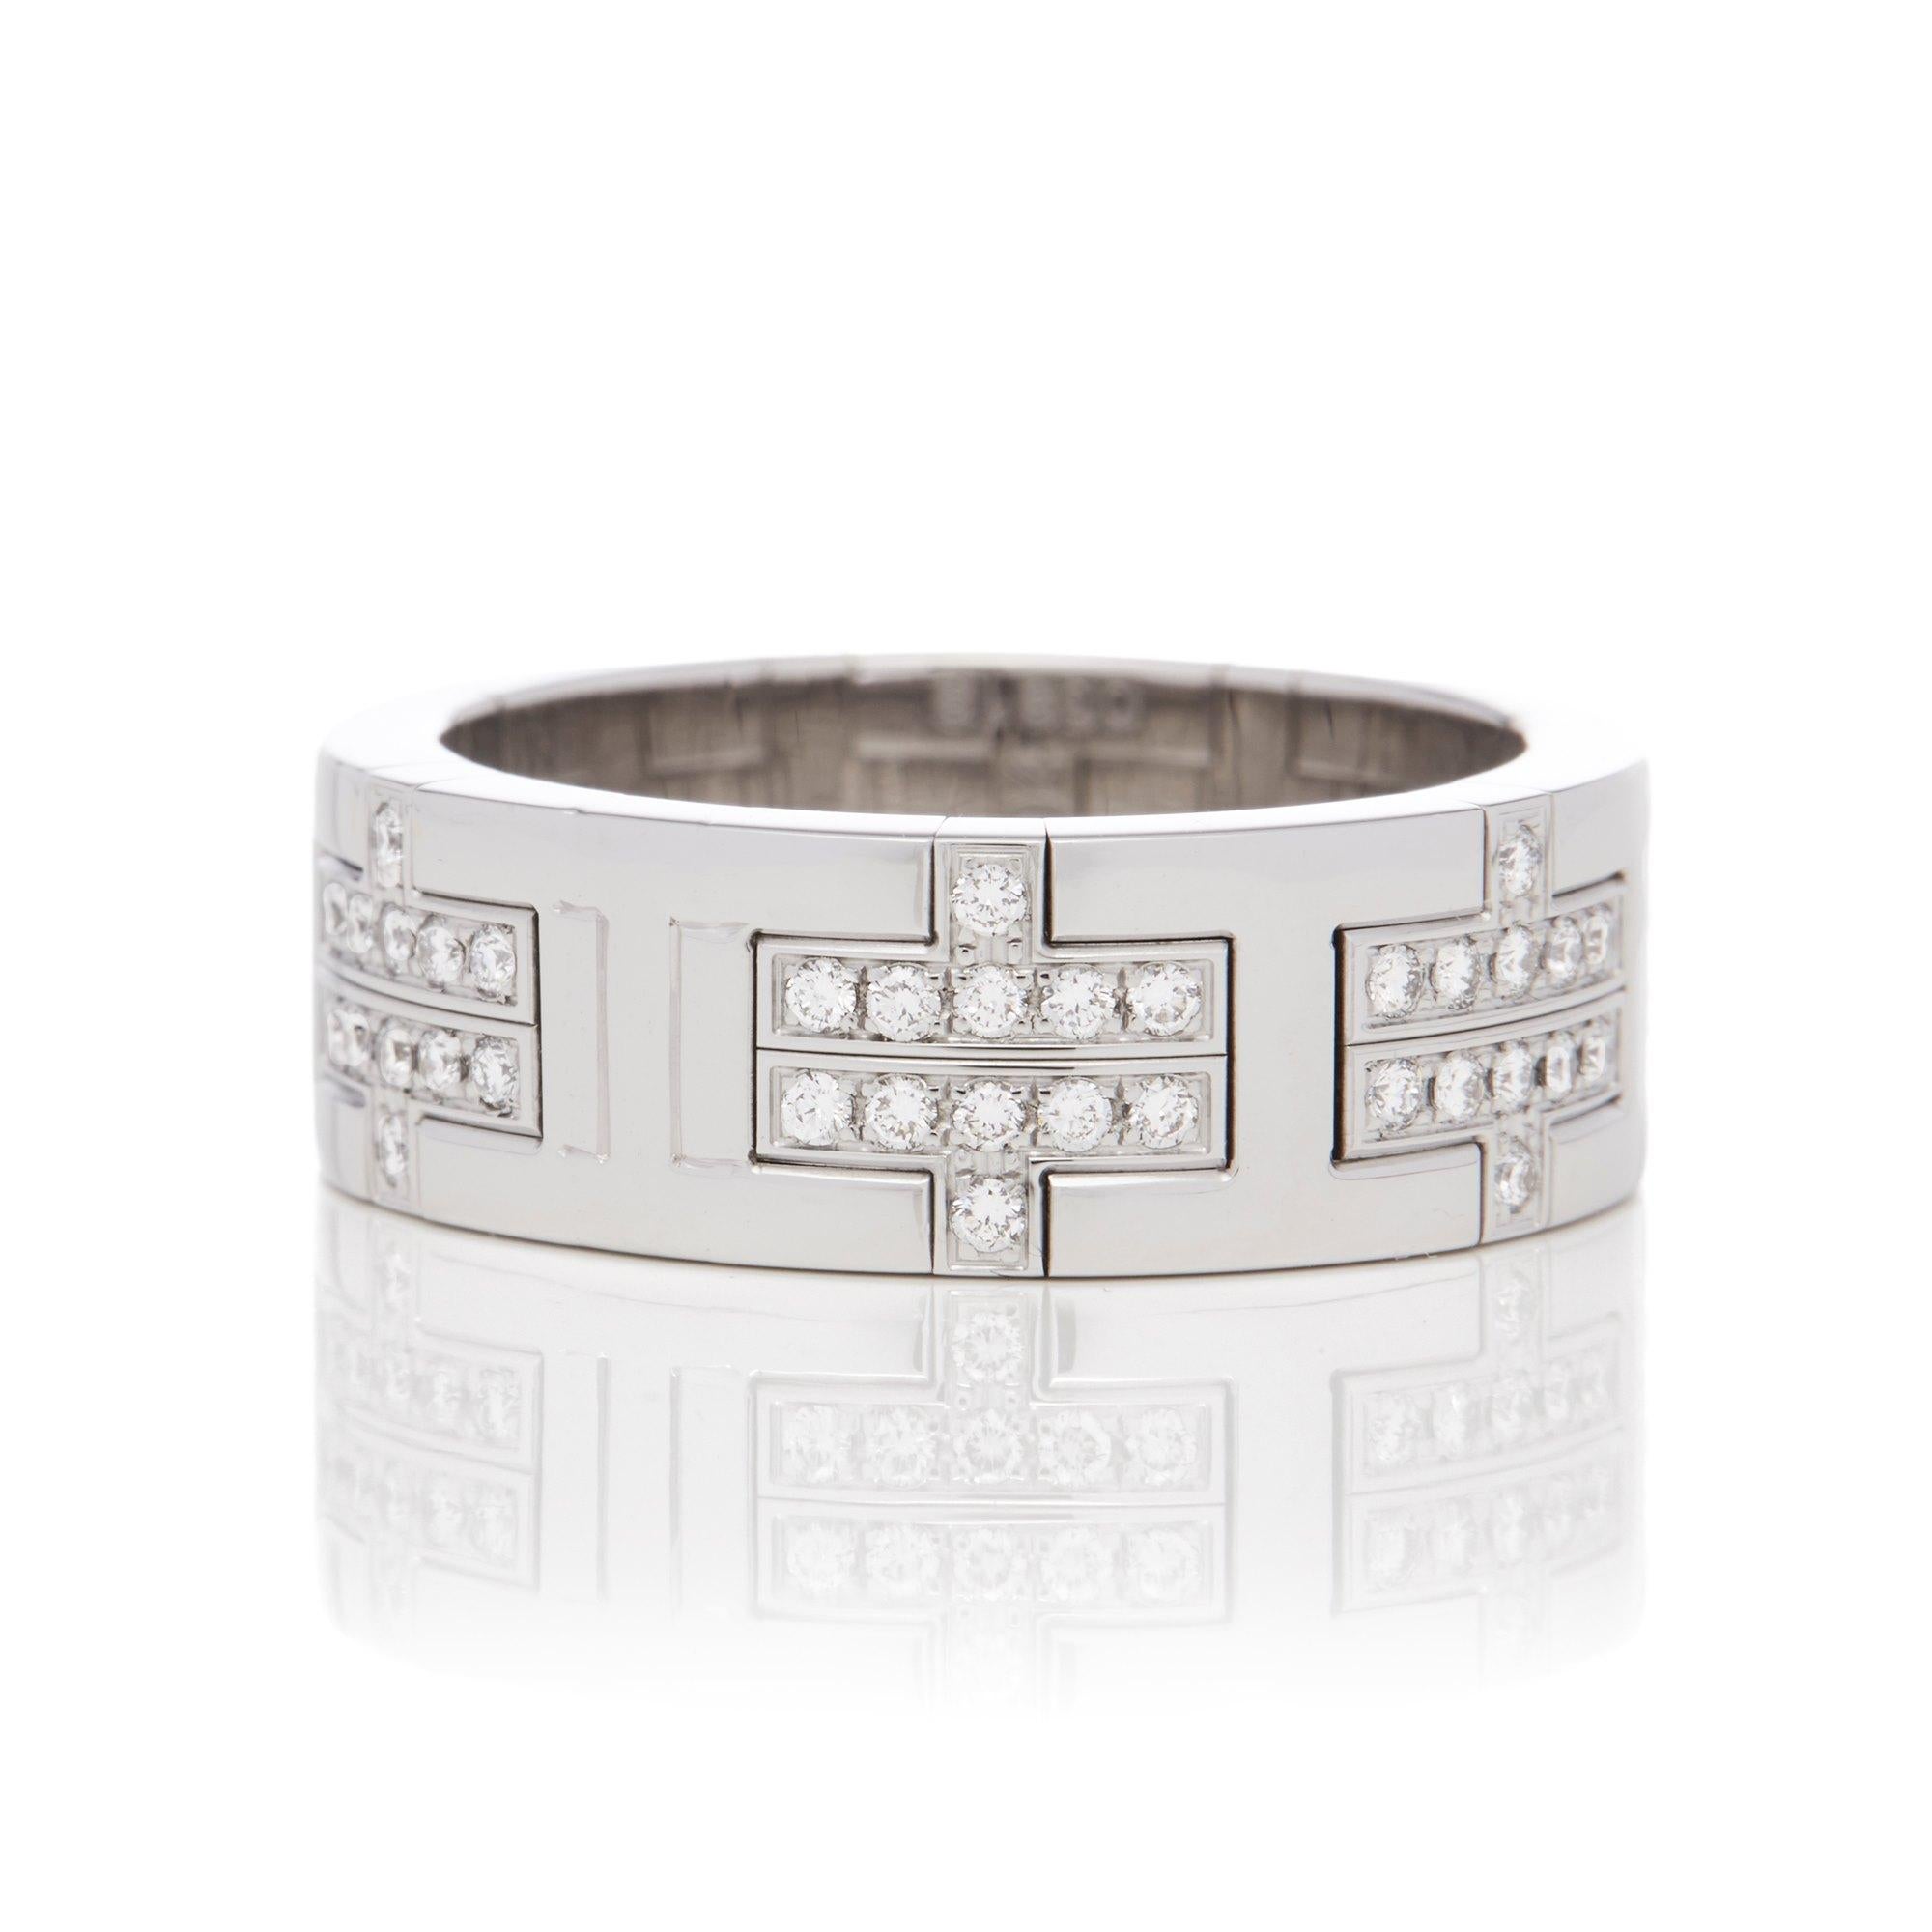 This Ring by Hermes is from their Kilim collection and features Seven Sections set with Round Brilliant Cut Diamonds Totalling 1.68cts. In 18k White Gold. Finger Size UK O 1/2, EU Size 54, USA Size 7 3/4. Complete with Xupes Presentation Box. Our